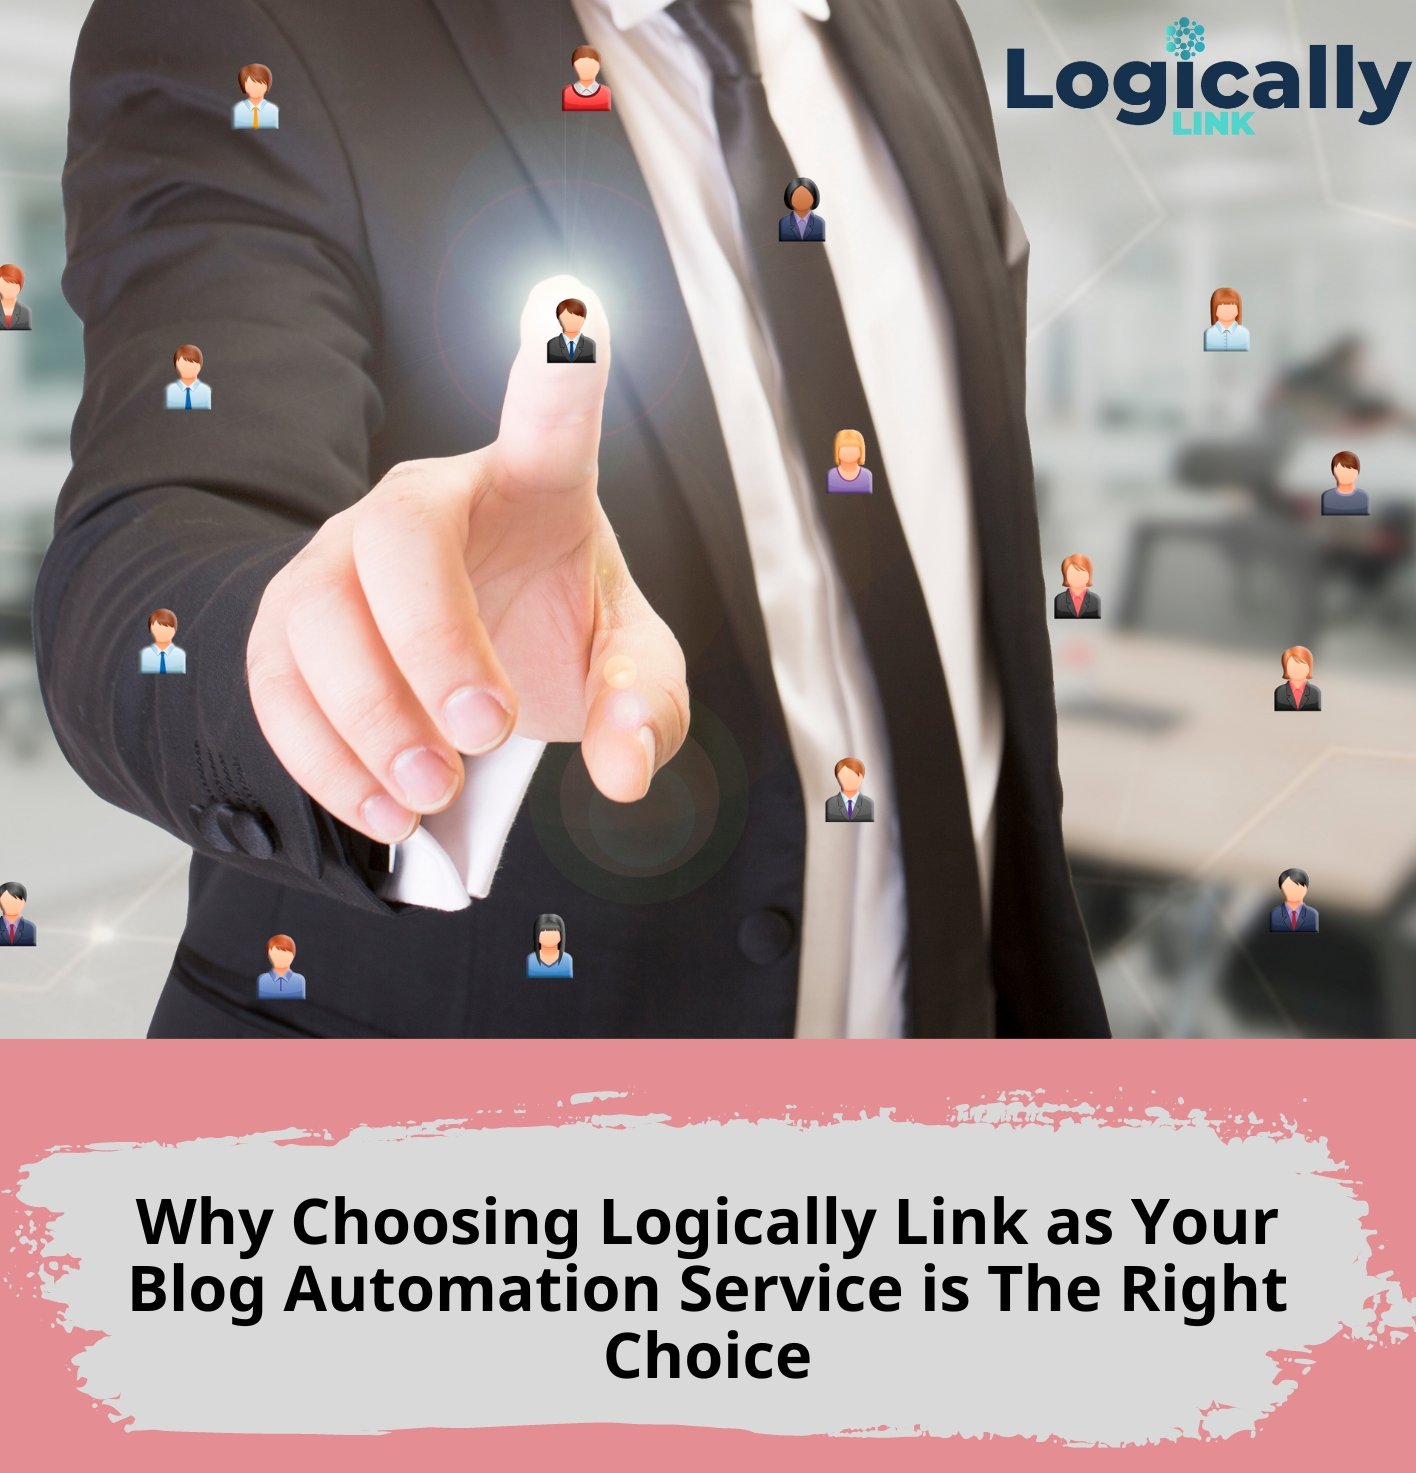 Why Choosing Logically Link as Your Blog Automation Service is The Right Choice